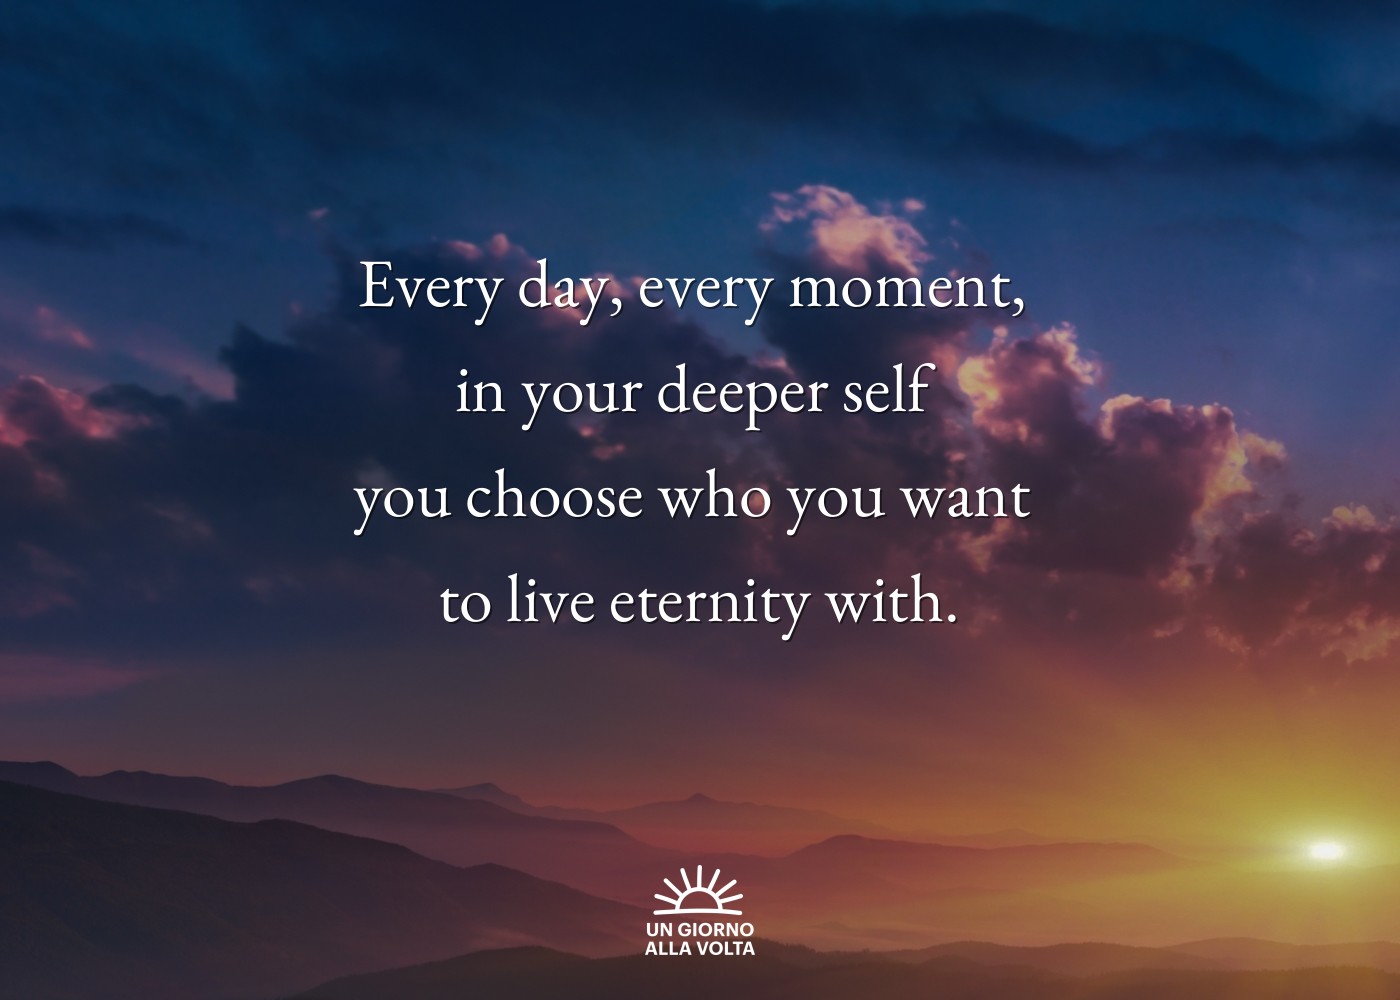 Every day, every moment, 
in your deeper self 
you choose who you want 
to live eternity with.
